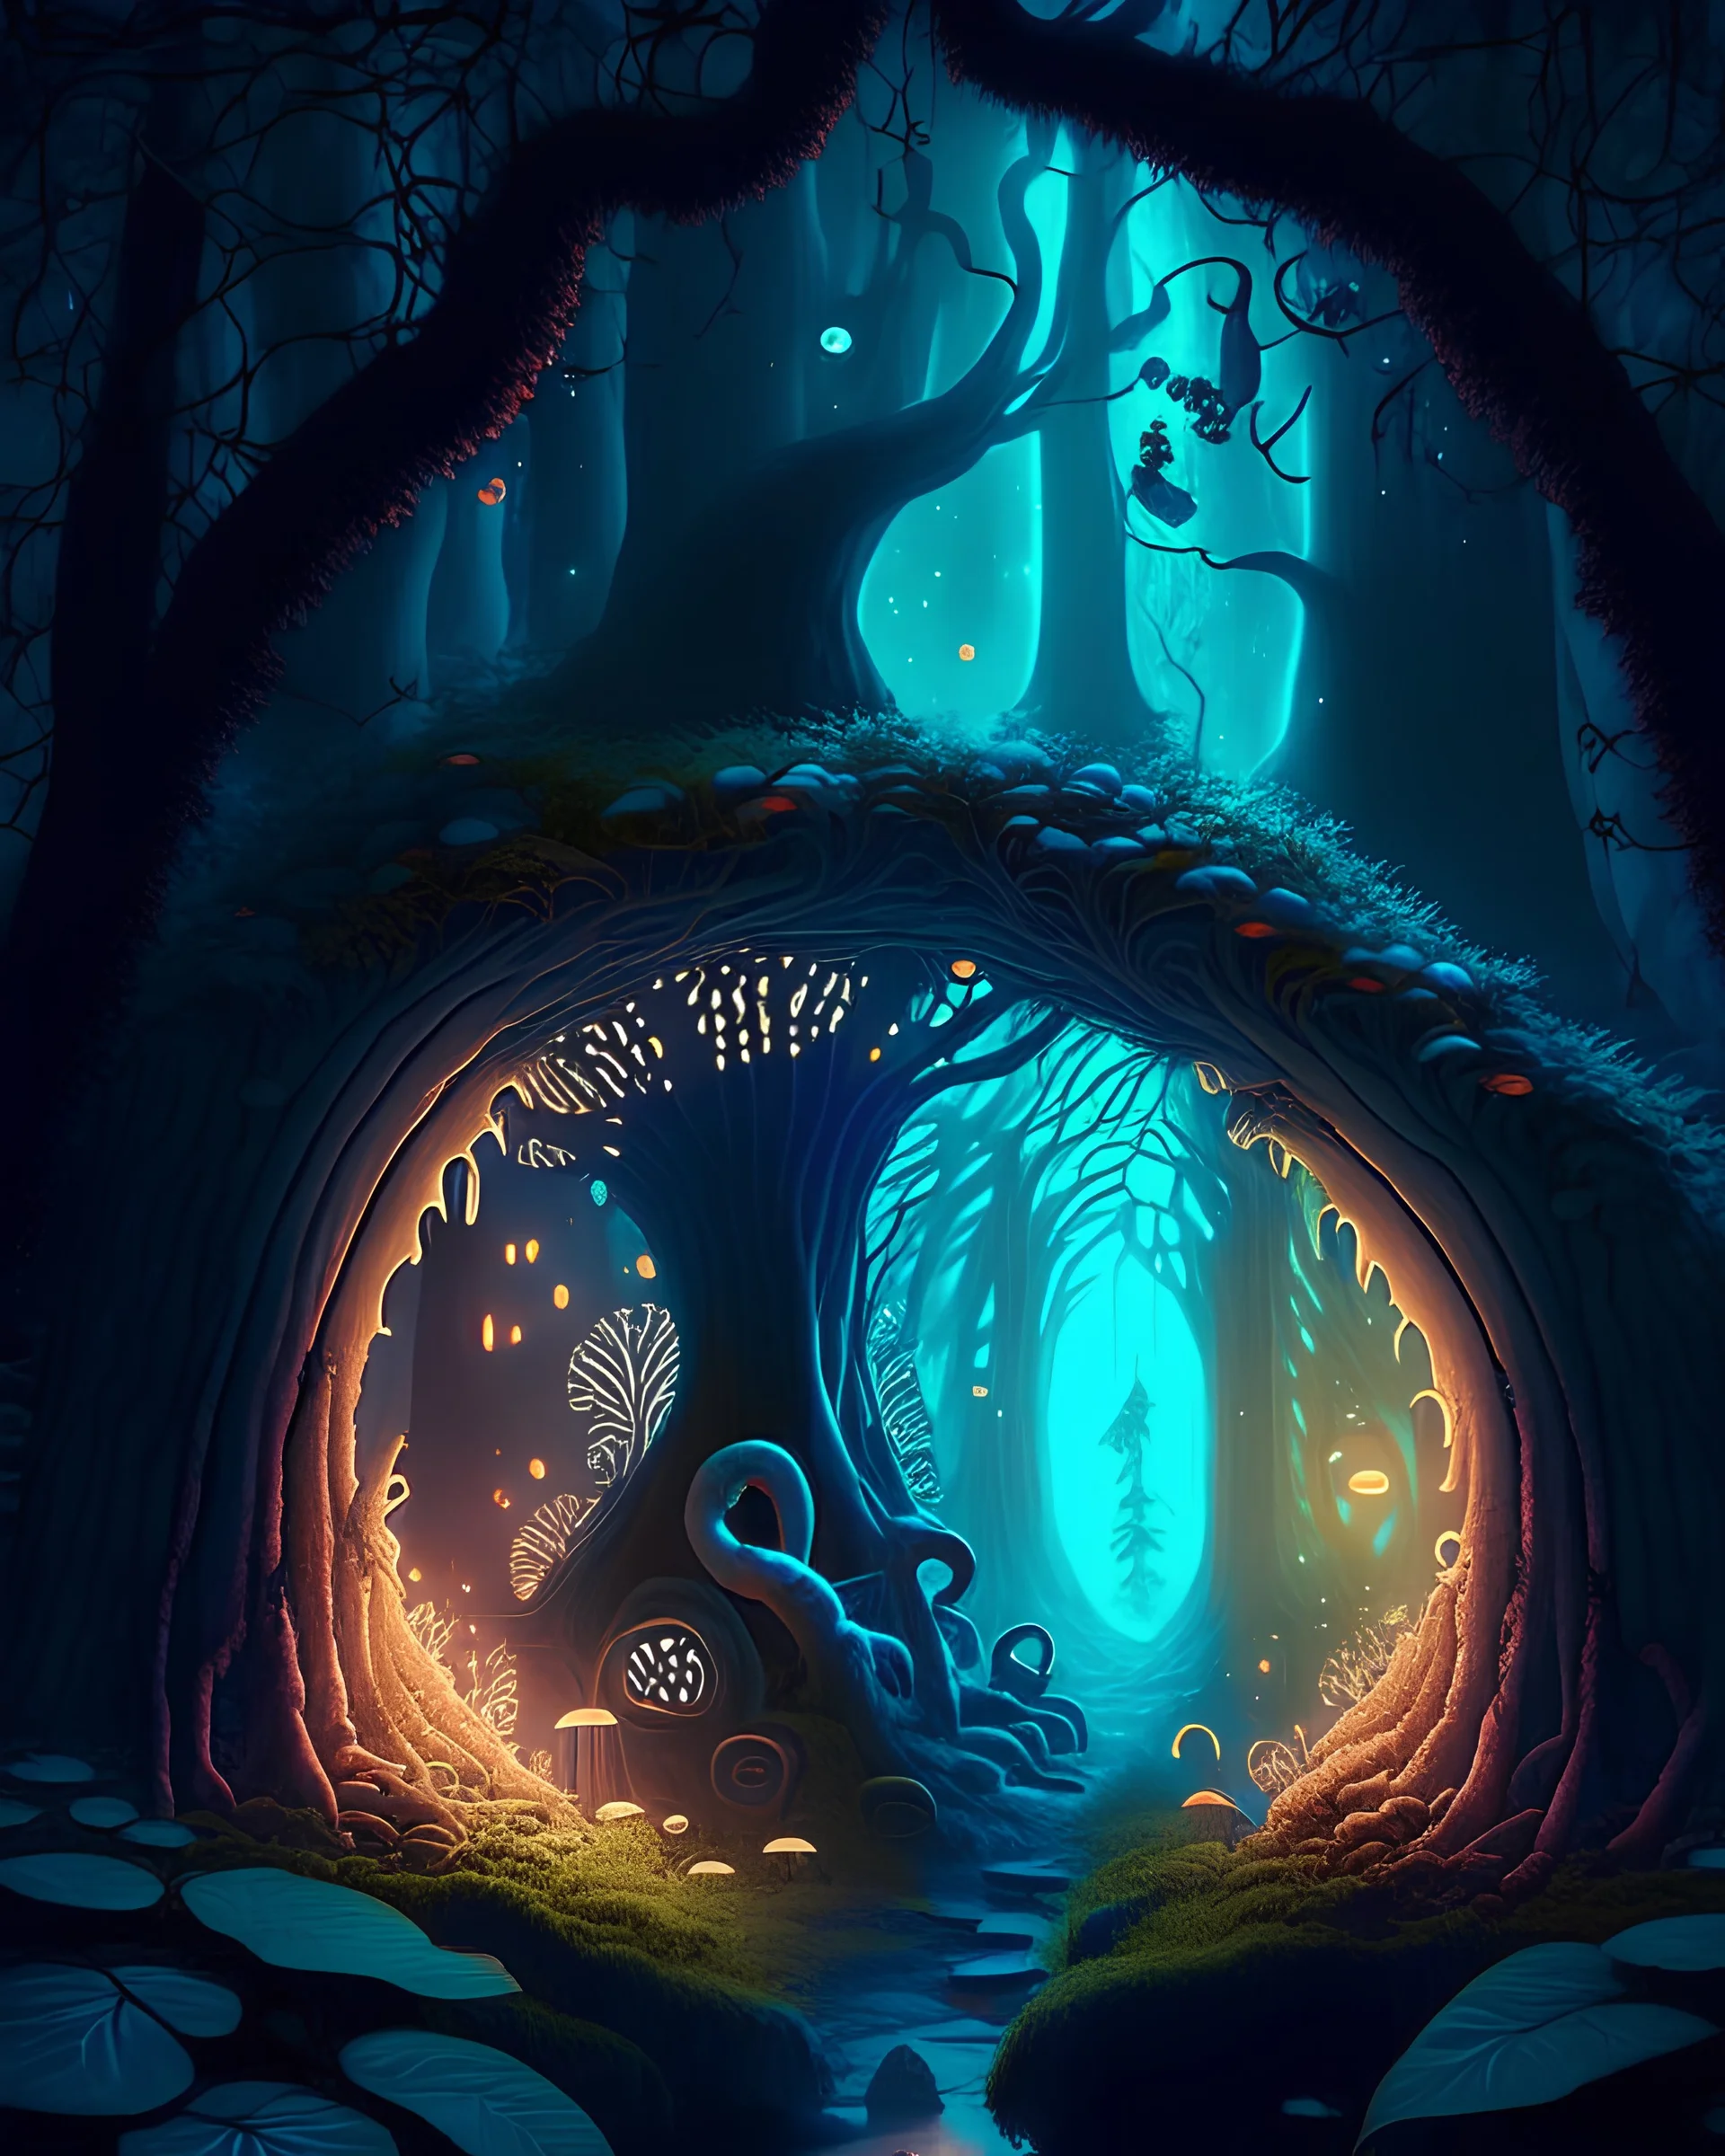 A mystical forest with glowing mushrooms and hidden doorways.